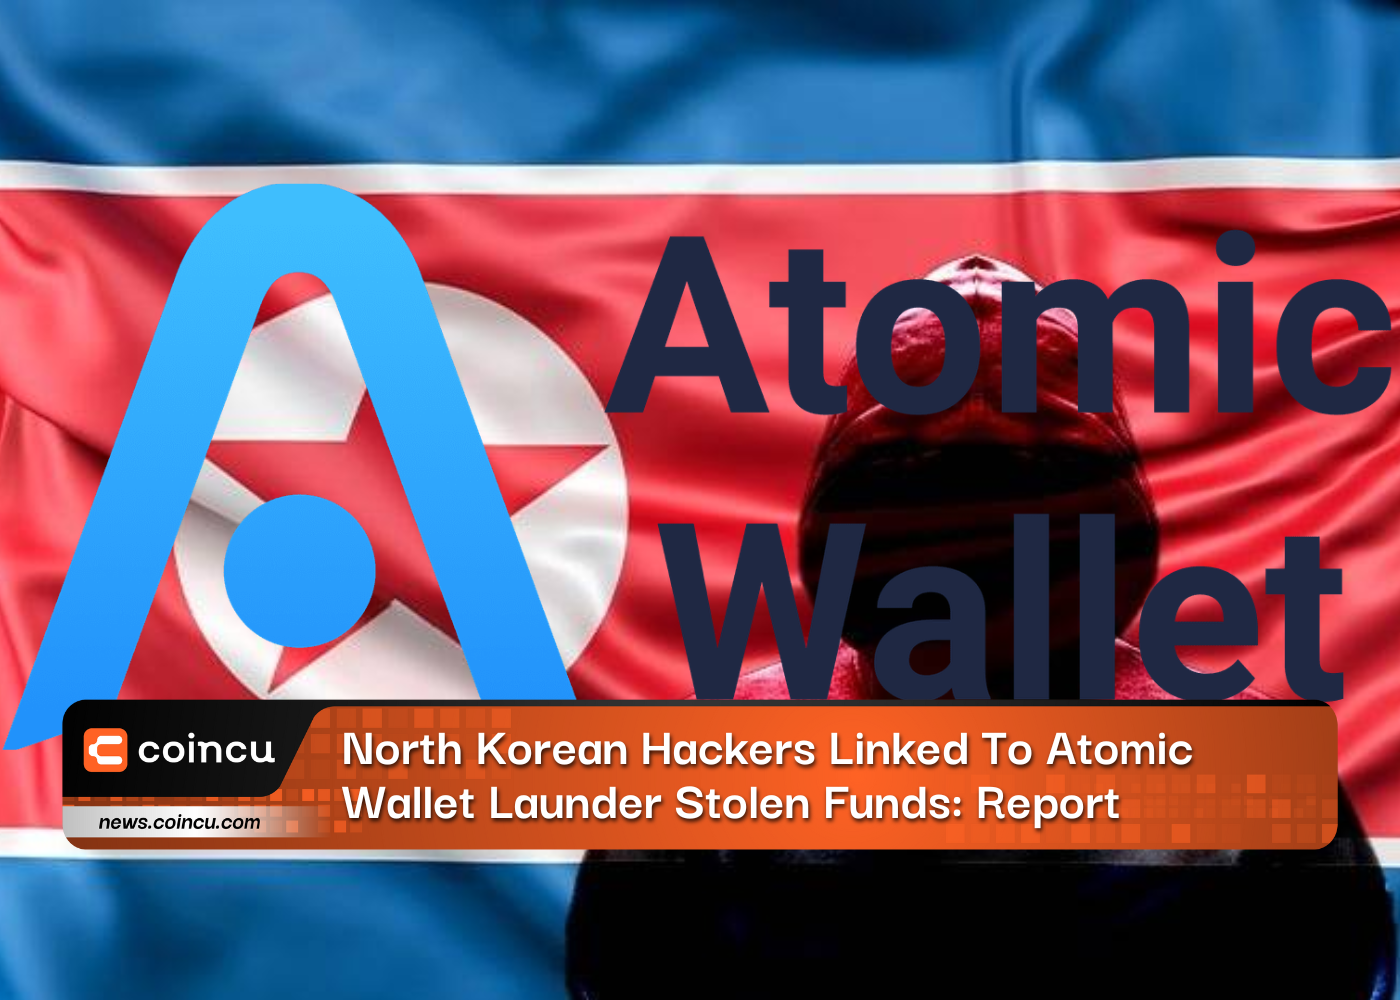 North Korean Hackers Linked To Atomic Wallet Launder Stolen Funds: Report